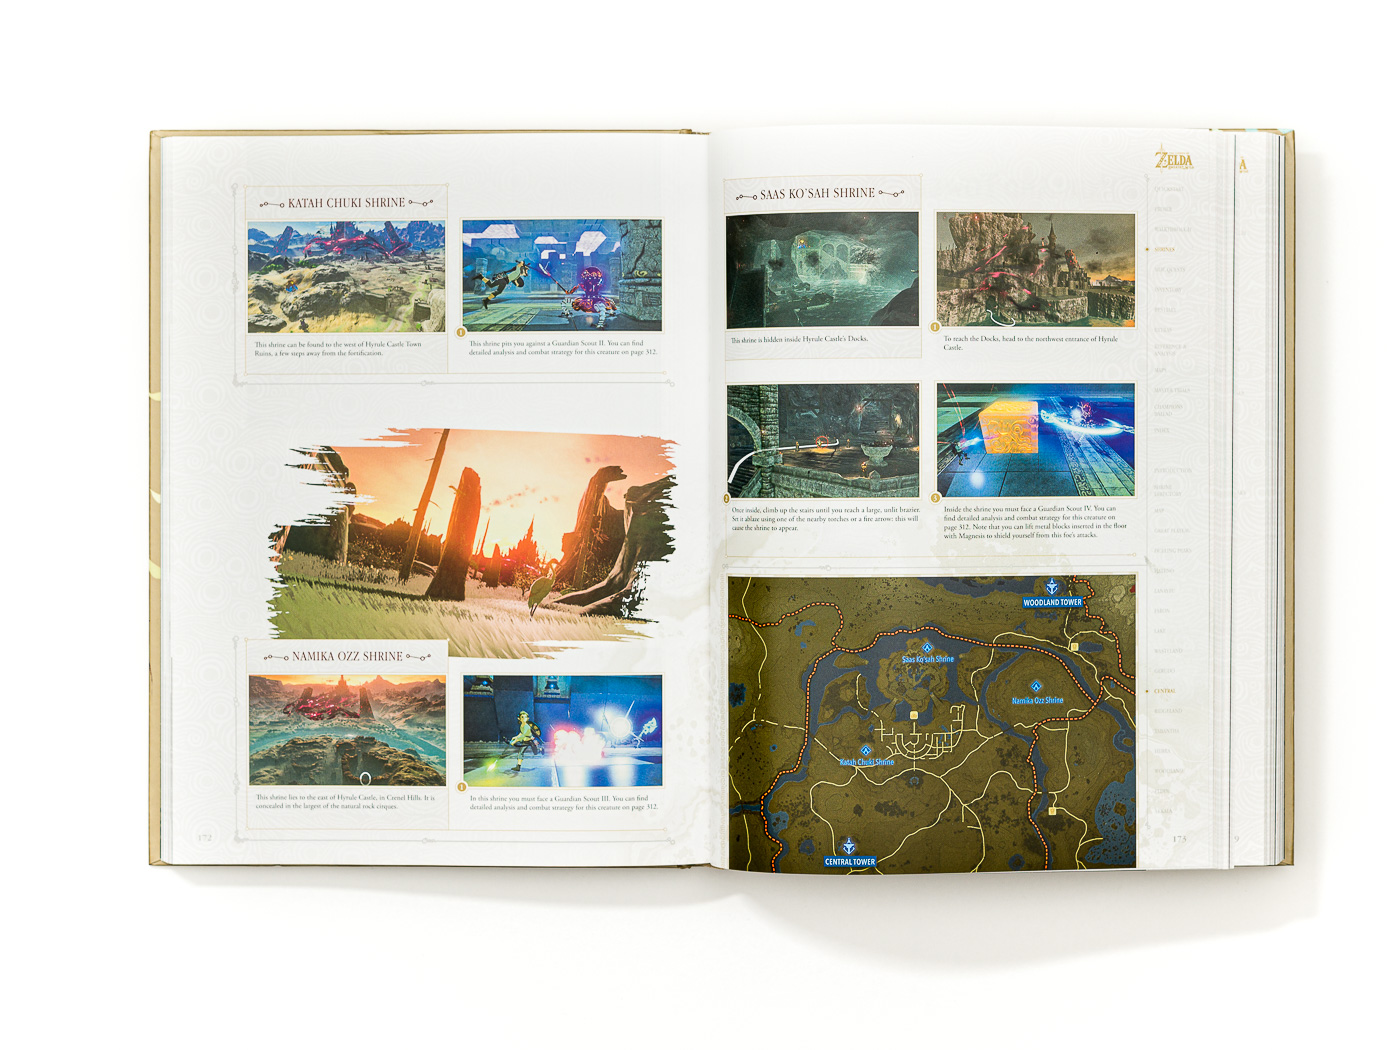 The Legend of Zelda: Breath of the Wild - The Complete Official 